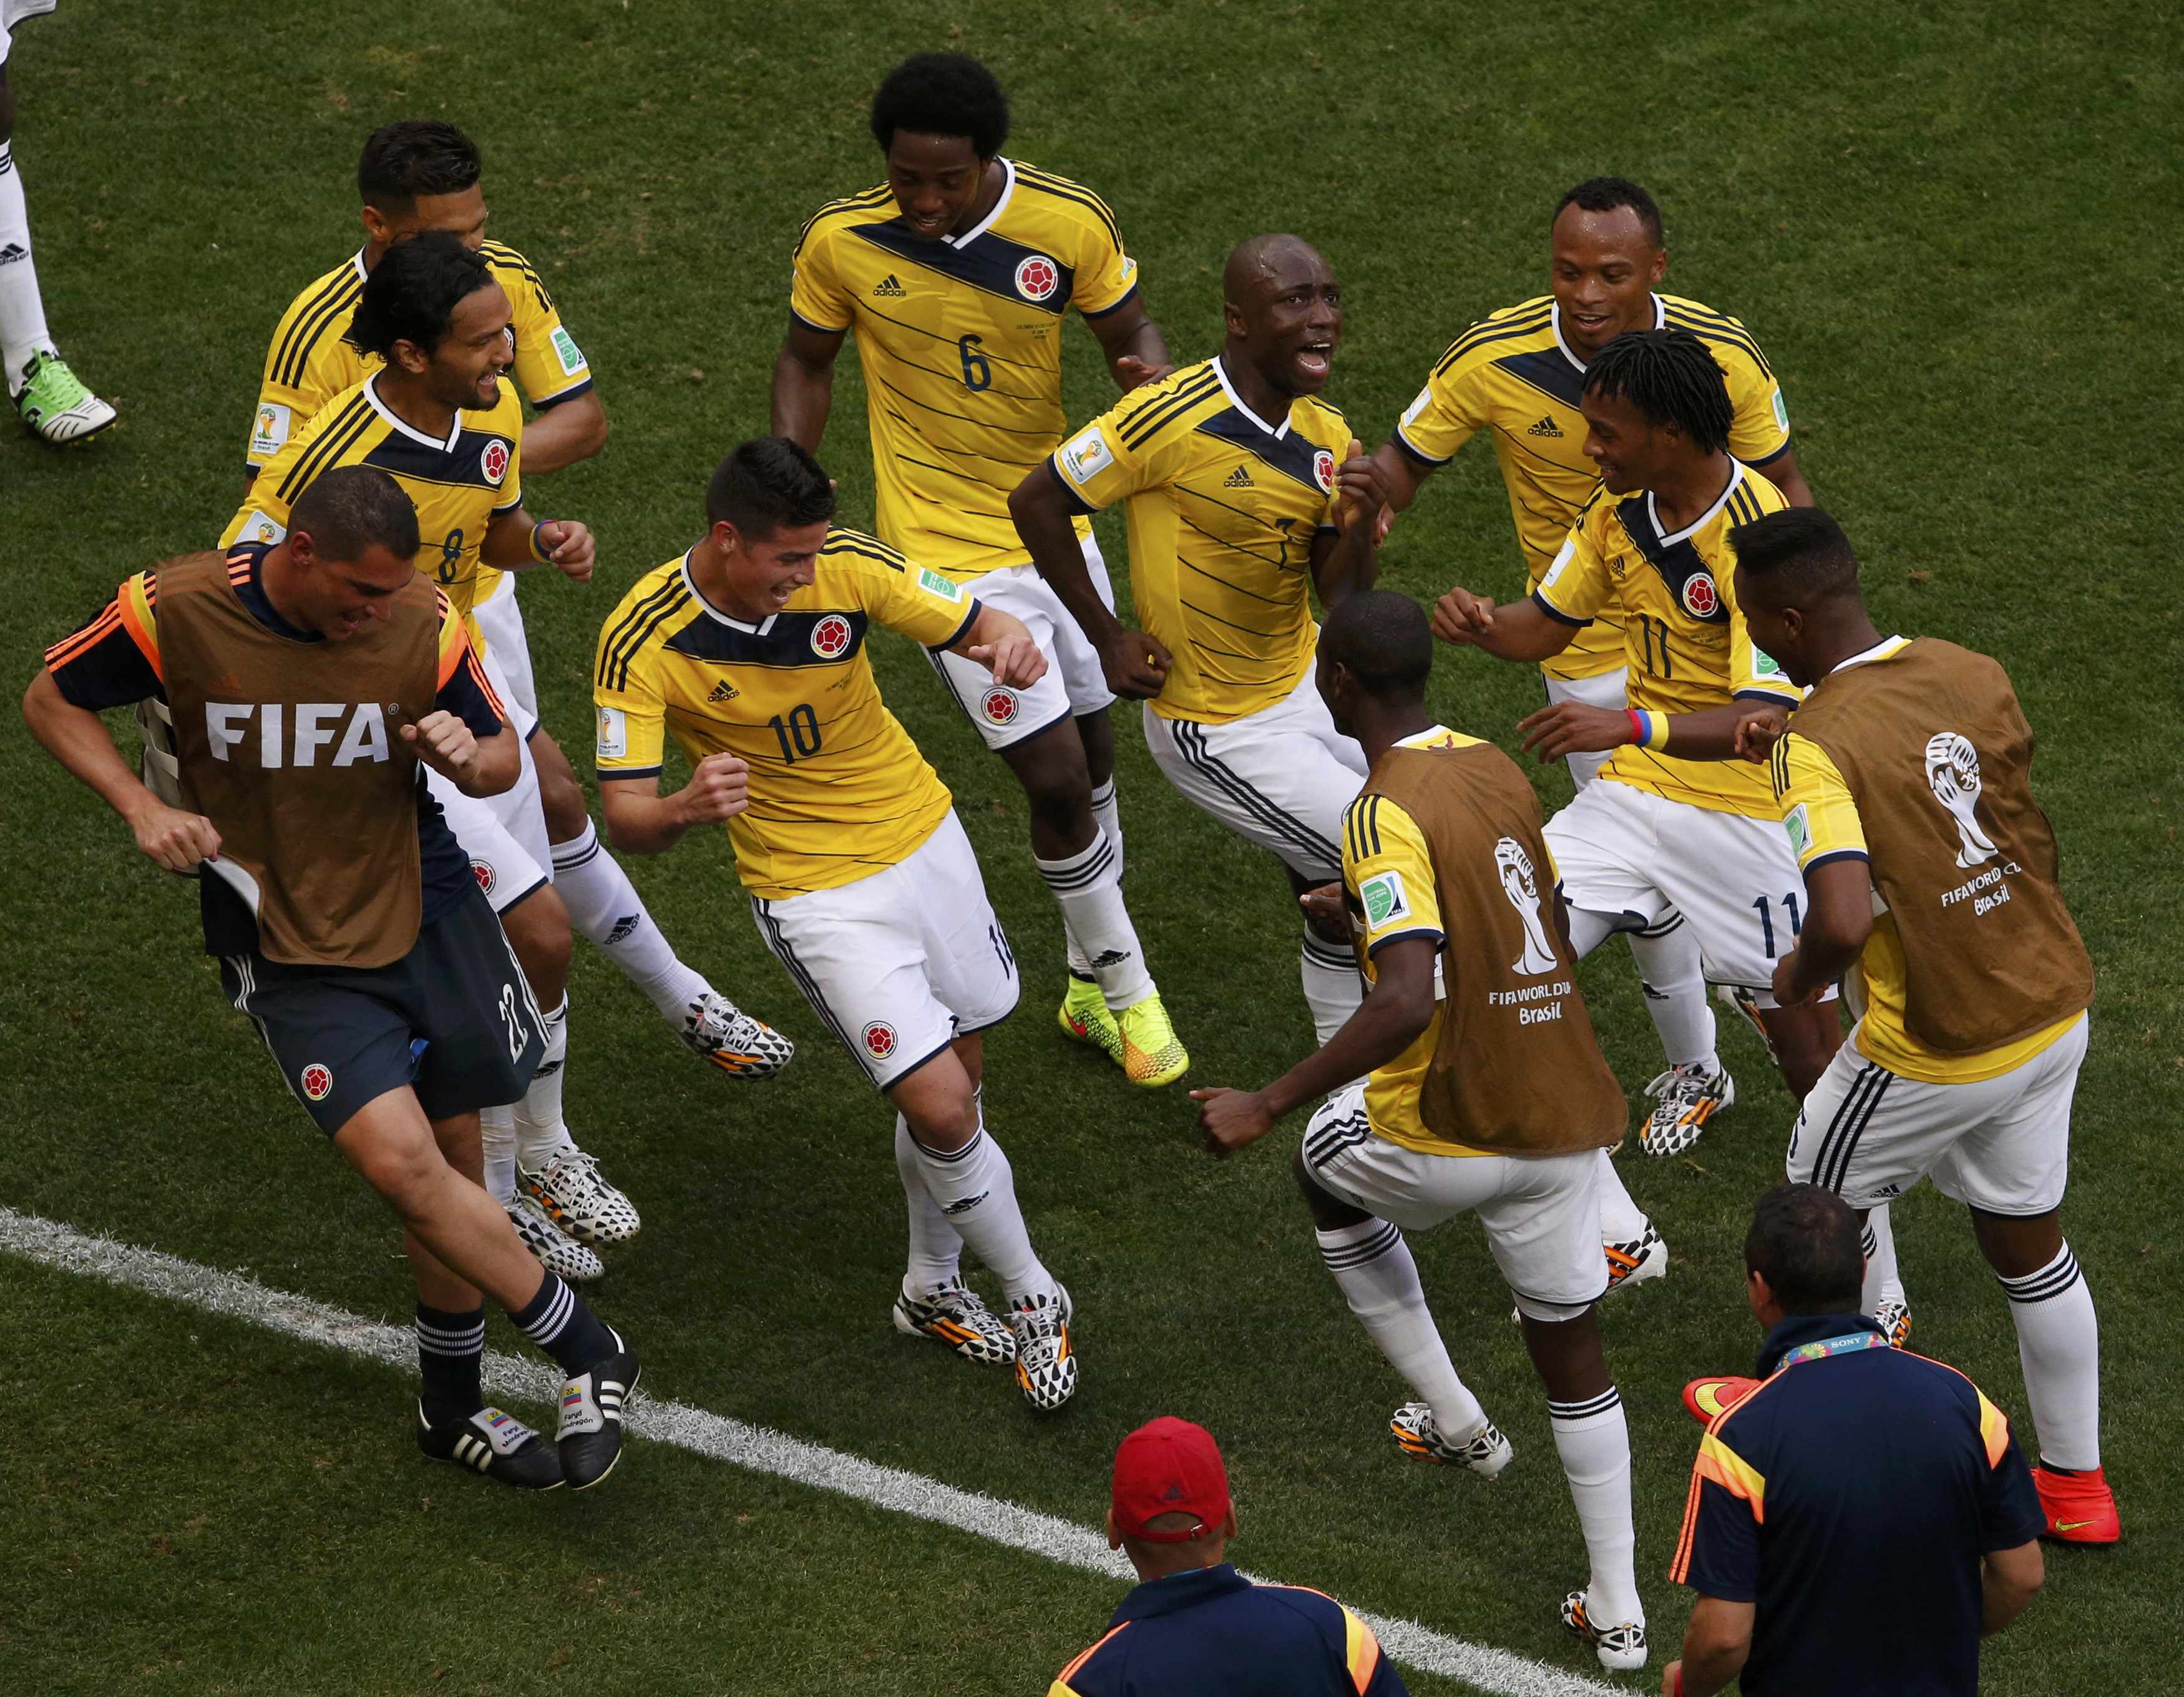 Colombia's James Rodriguez (4th L) celebrates by dancing with his teammates after scoring past Ivory Coast during their 2014 World Cup Group C soccer match at the Brasilia national stadium in Brasilia June 19, 2014.                       REUTERS/David Gra